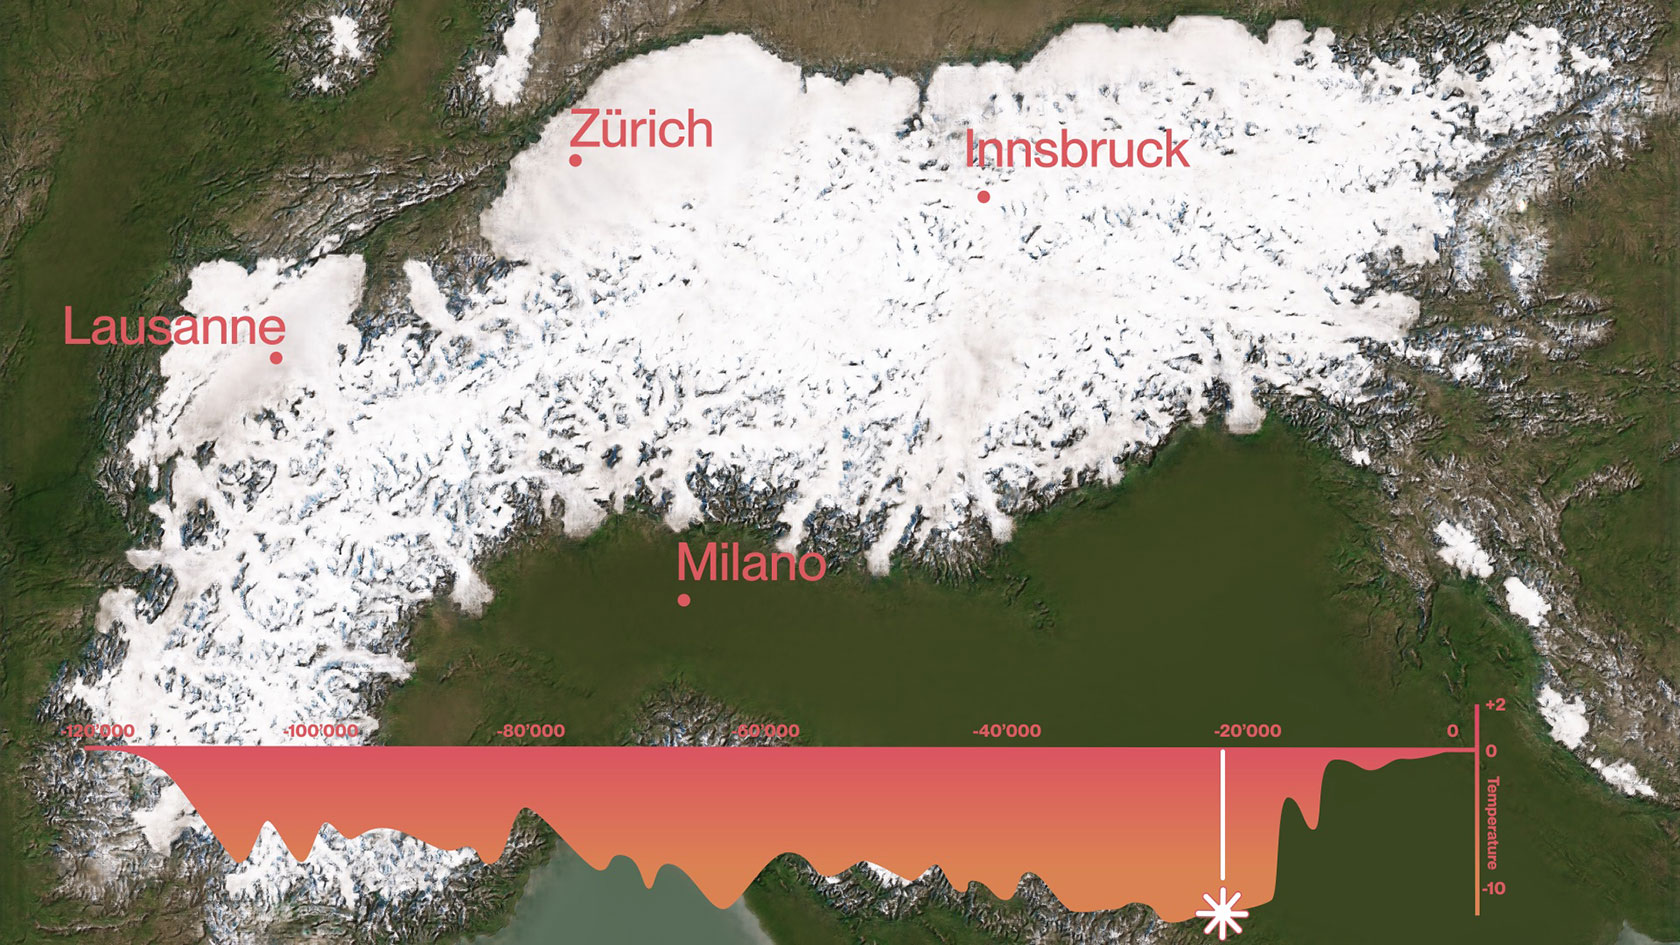 The Alps at the time of the last glacial maximum around 24,000 years ago.